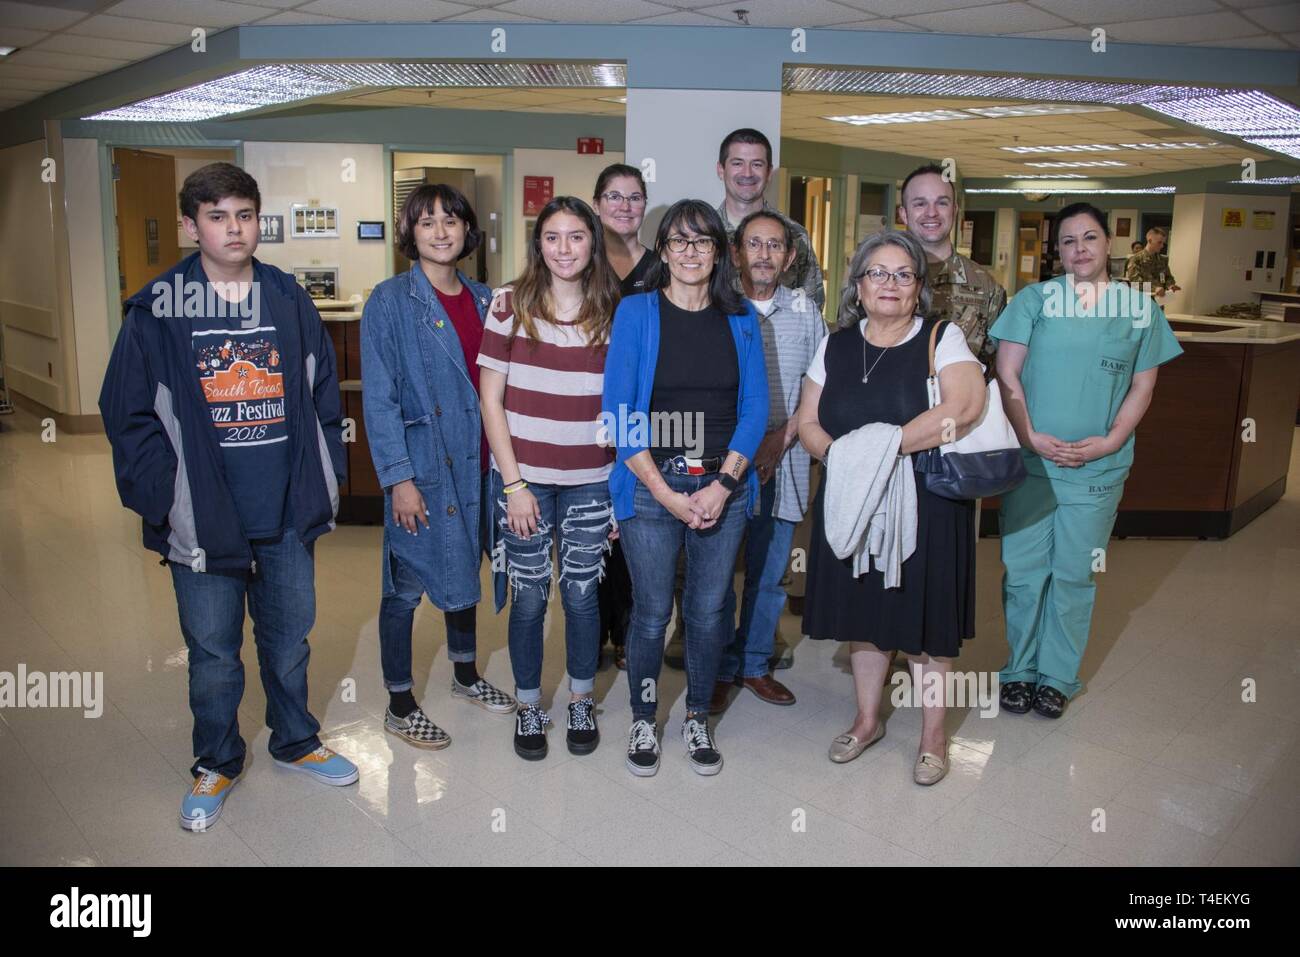 Rita Ibanez, along with her parents and children, poses for a photo with the Extracorporeal Membrane Oxygenation team at Brooke Army Medical Center, Fort Sam Houston, Texas, March 22, 2019. Ibanez and her family met with the ECMO team to thank them for the care she received while she was on ECMO for two weeks in 2015. Stock Photo